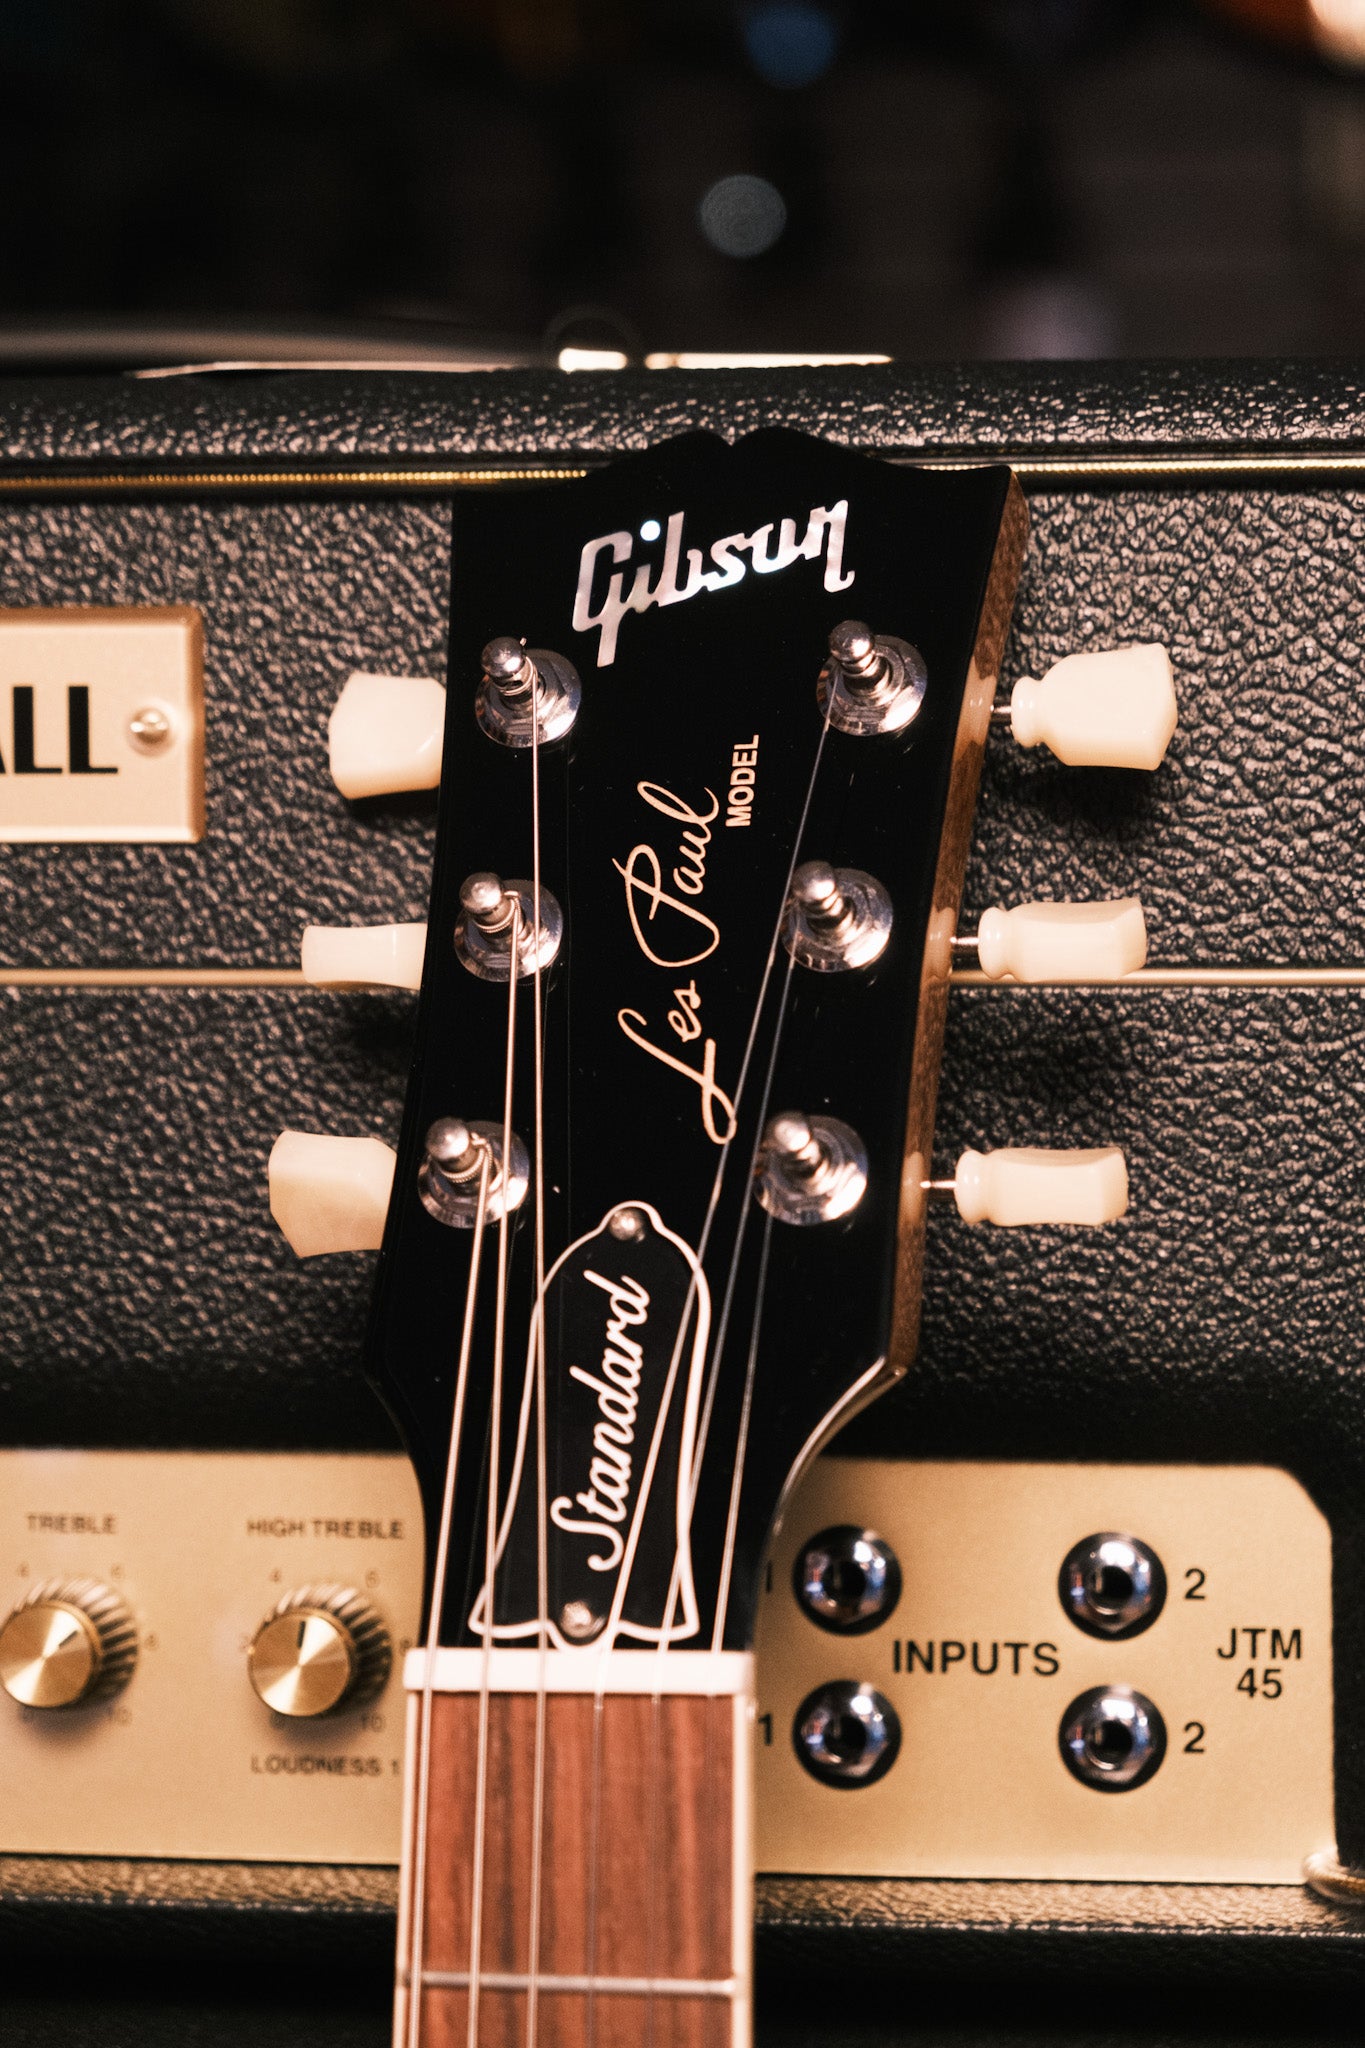 Gibson Les Paul Standard '50s Gold Top